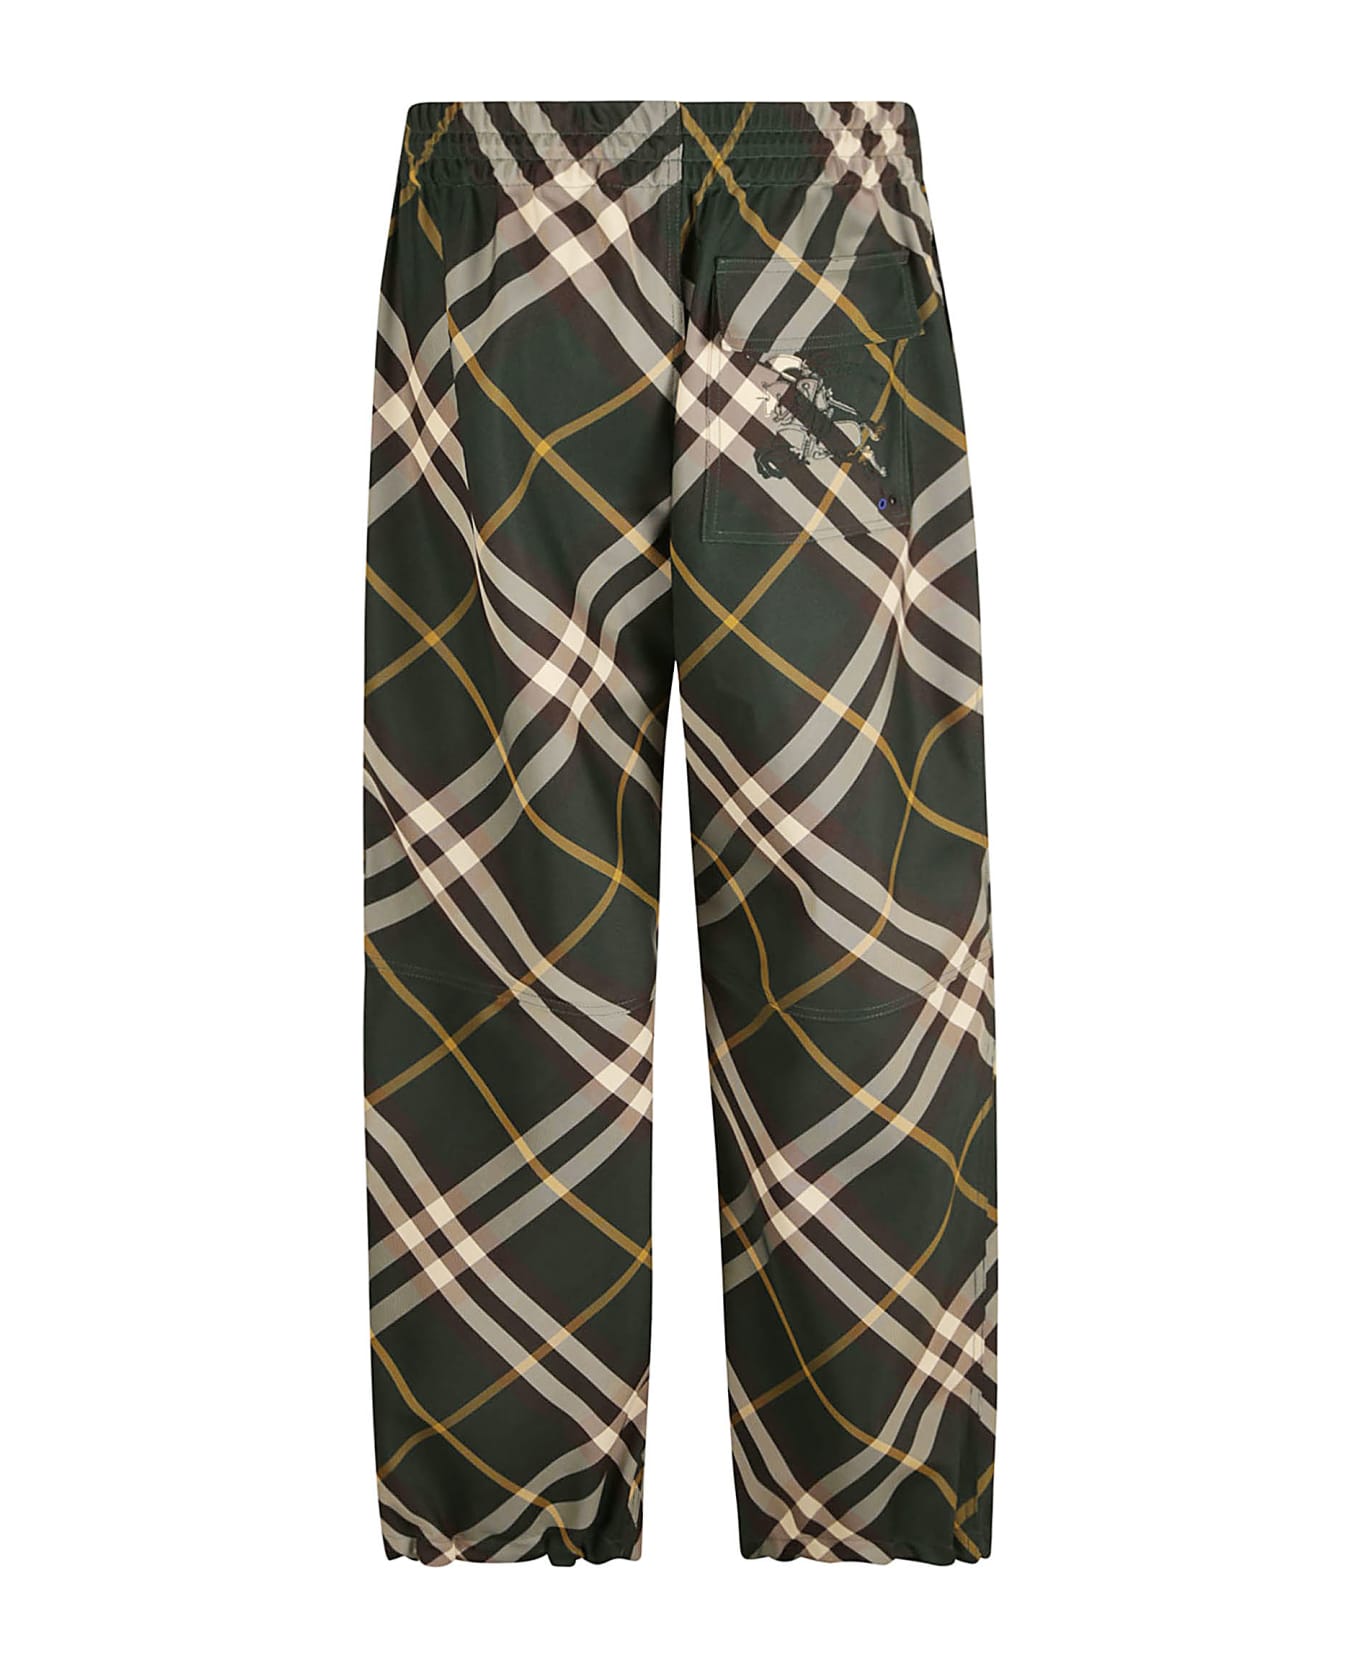 Burberry Elastic Waist Check Patterned Trousers - Ivy IP Check